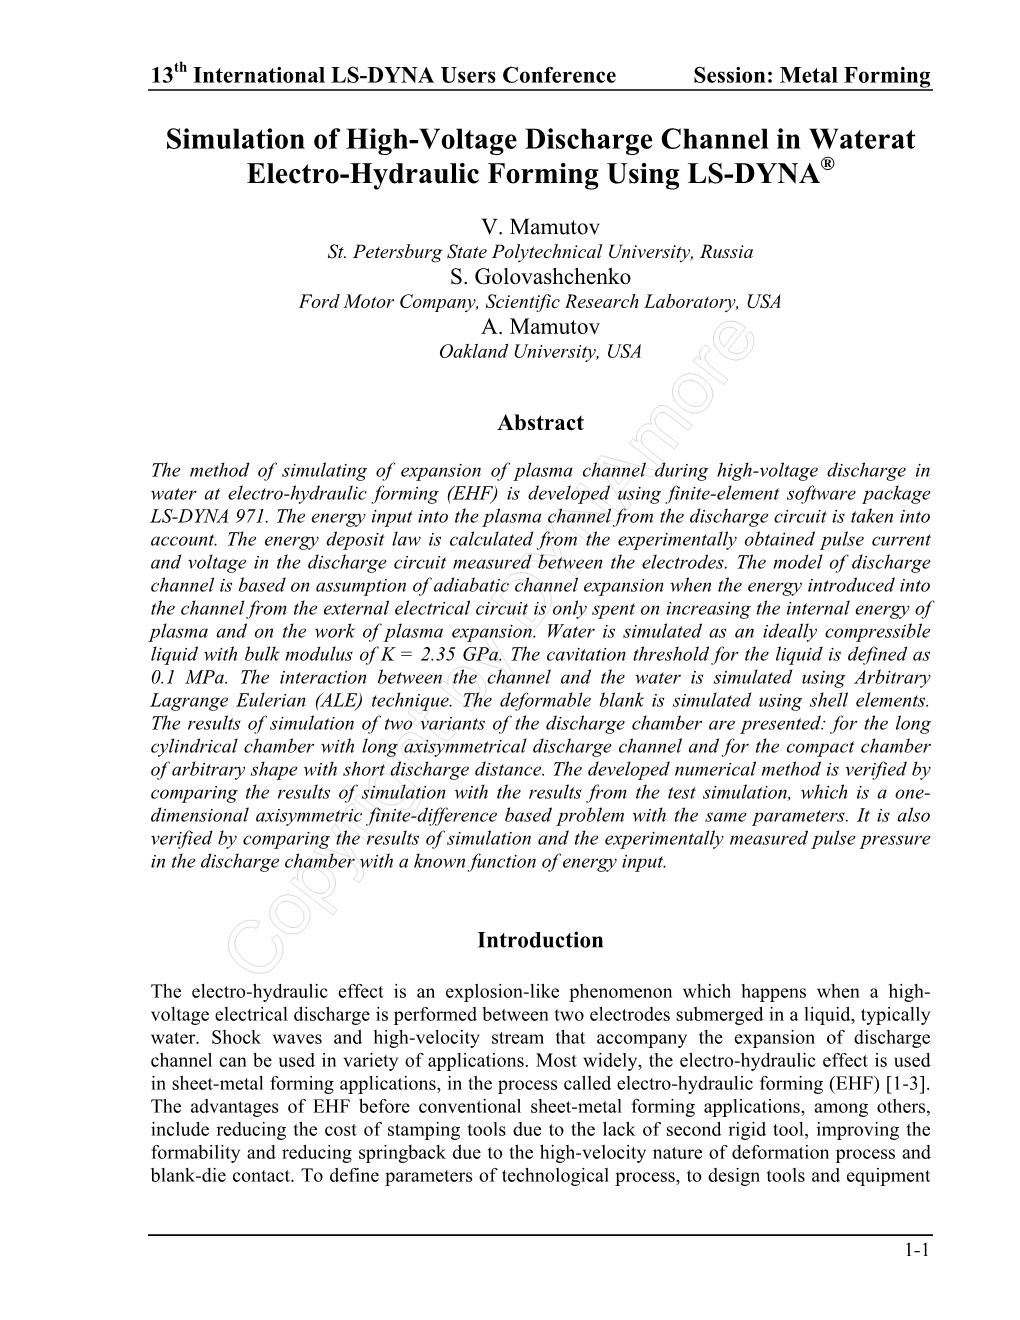 Simulation of High-Voltage Discharge Channel in Waterat Electro-Hydraulic Forming Using LS-DYNA®